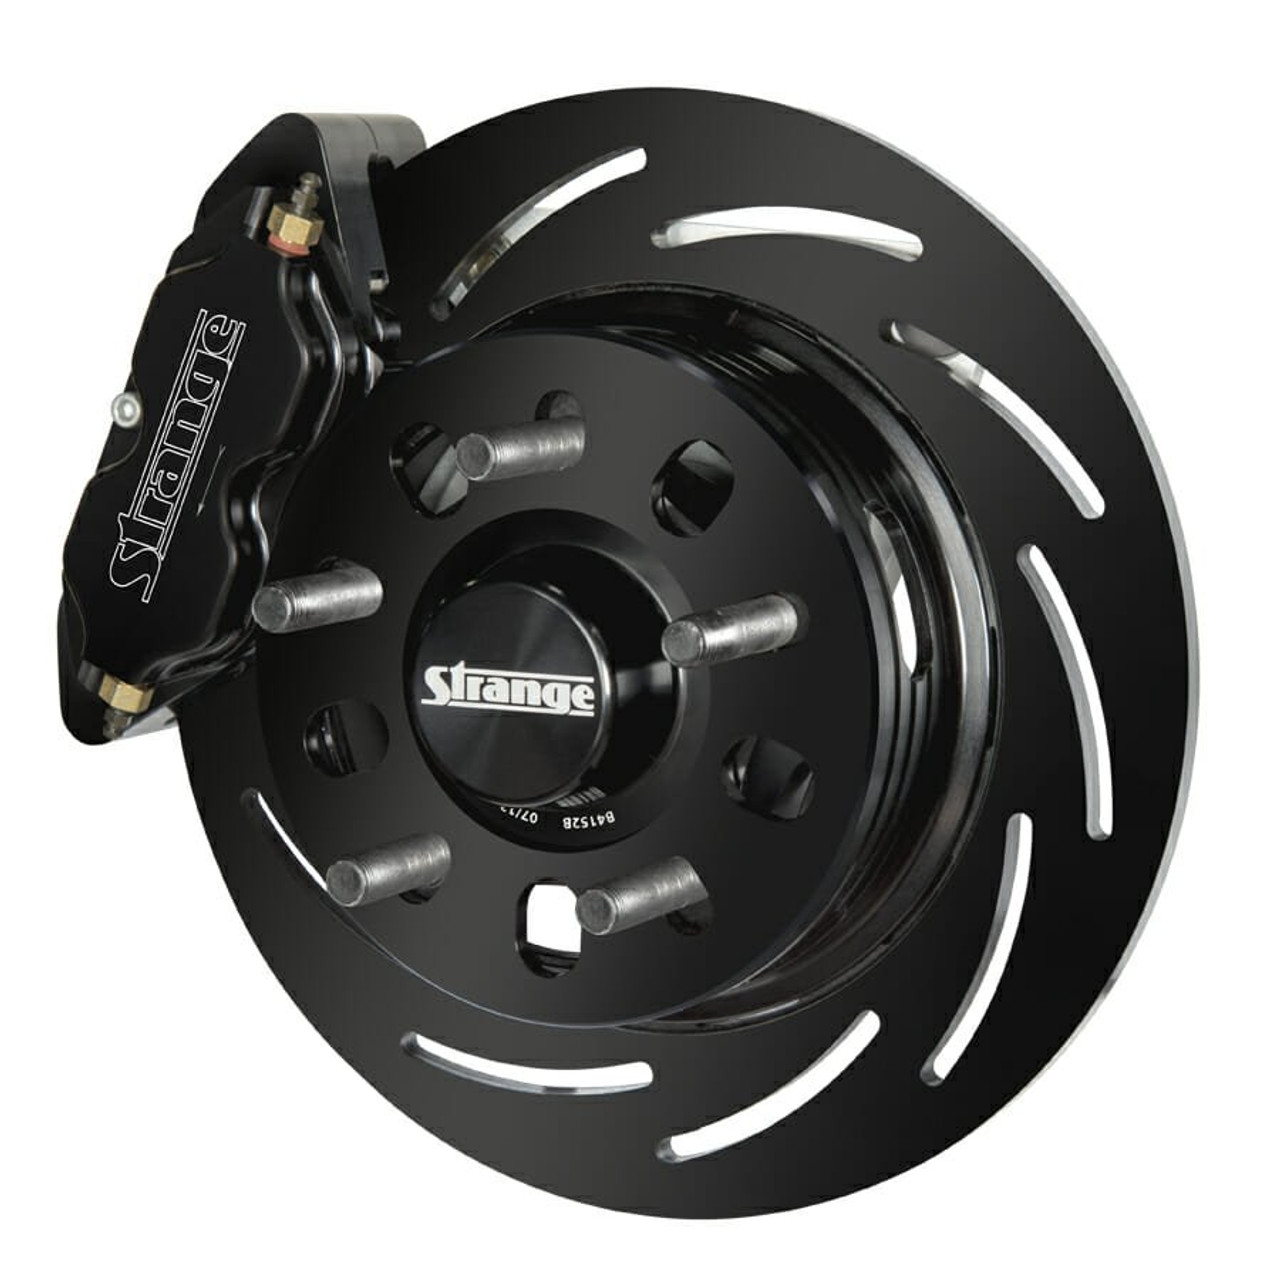 Strange Pro Series II Front Brake Kit - 4 Piston Calipers & Two Piece Slotted Rotors (2015-2020 Mustang)